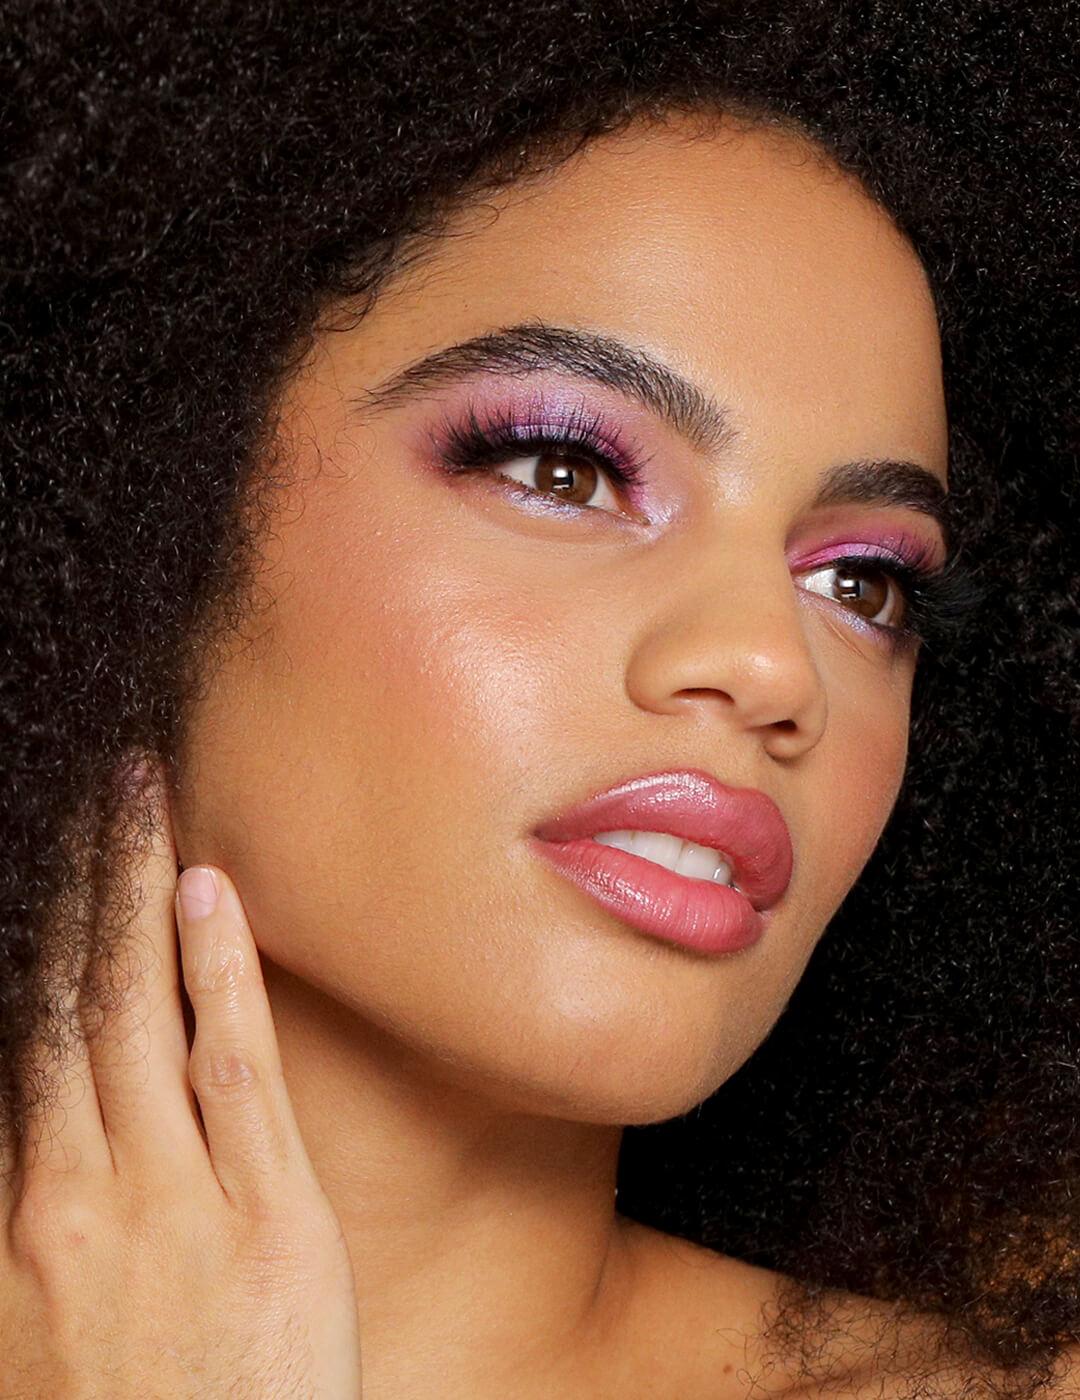 A photo of a woman looking gorgeous on her fuchsia eye look while holding her neck in one hand